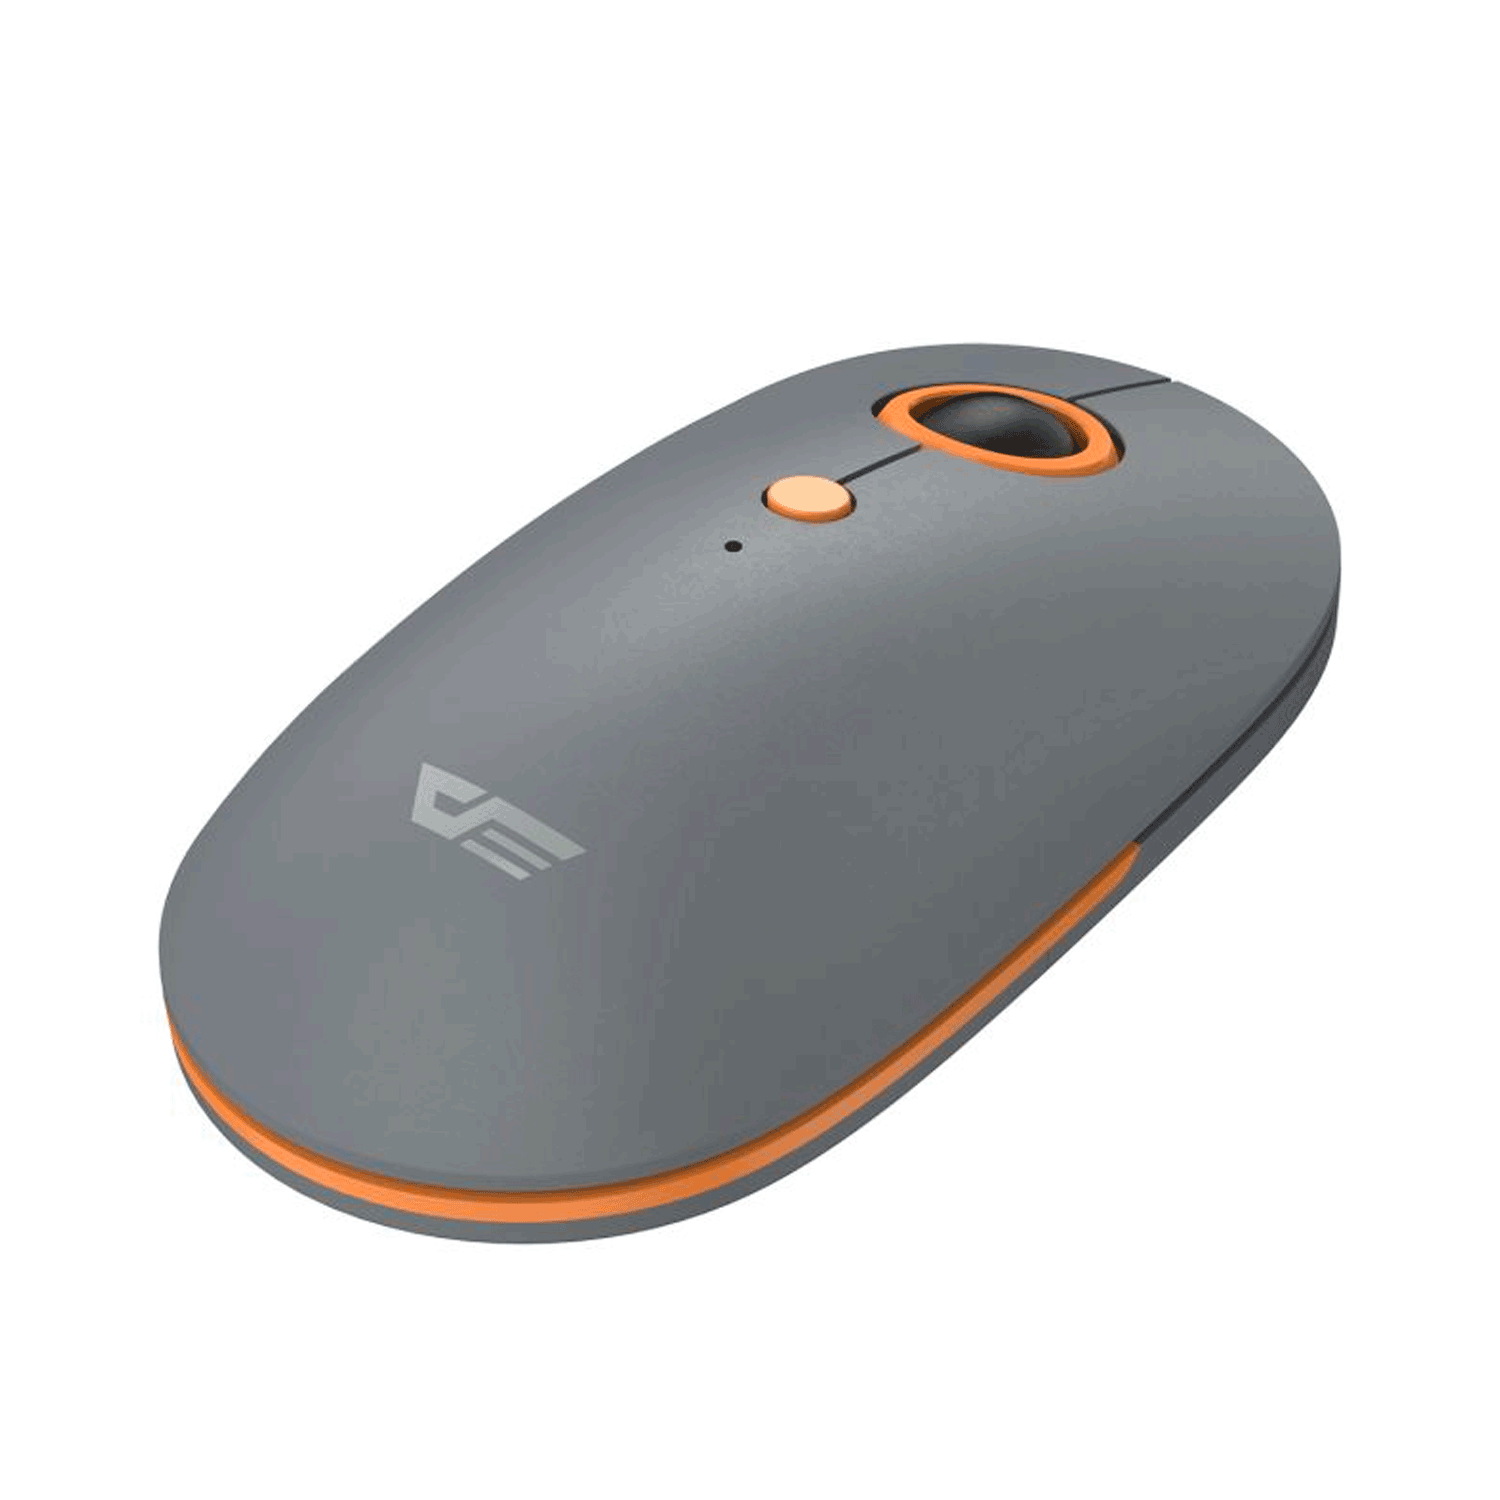 Mouse Darkflash M310